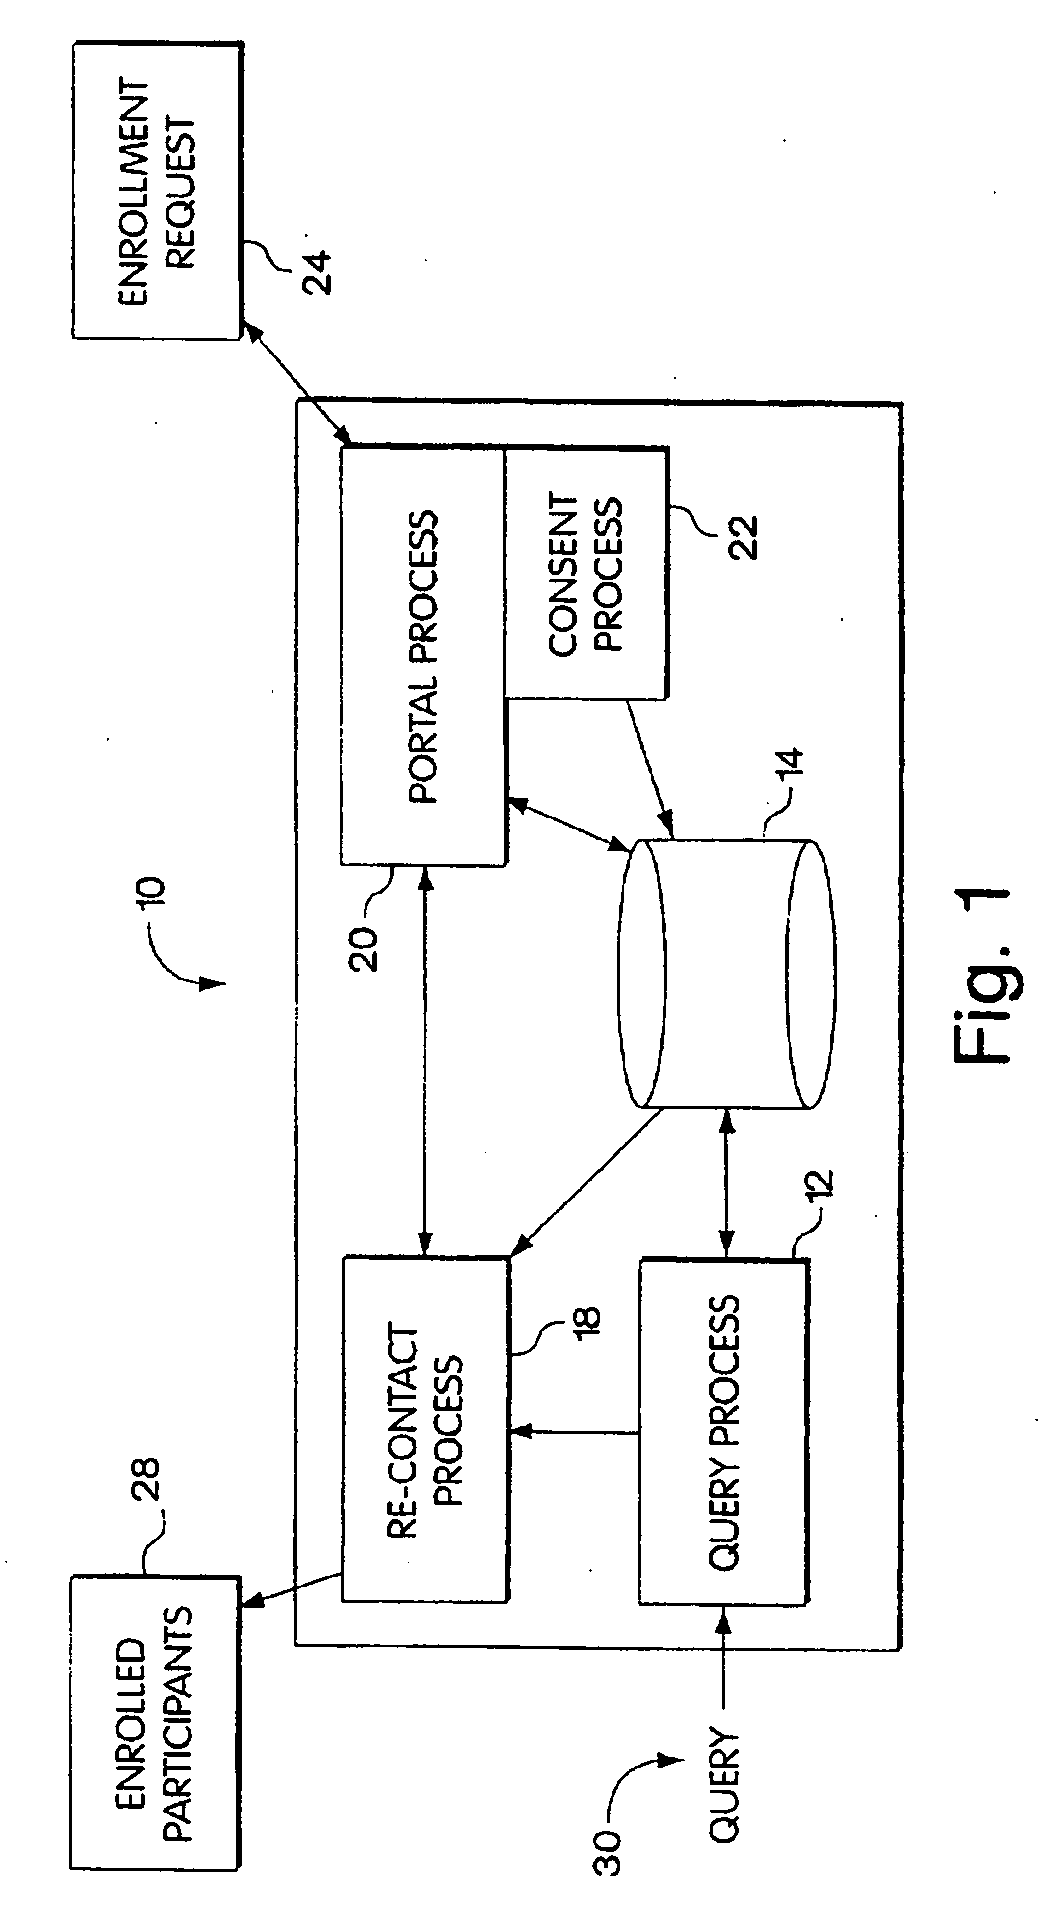 Methods and systems for managing informed consent processes